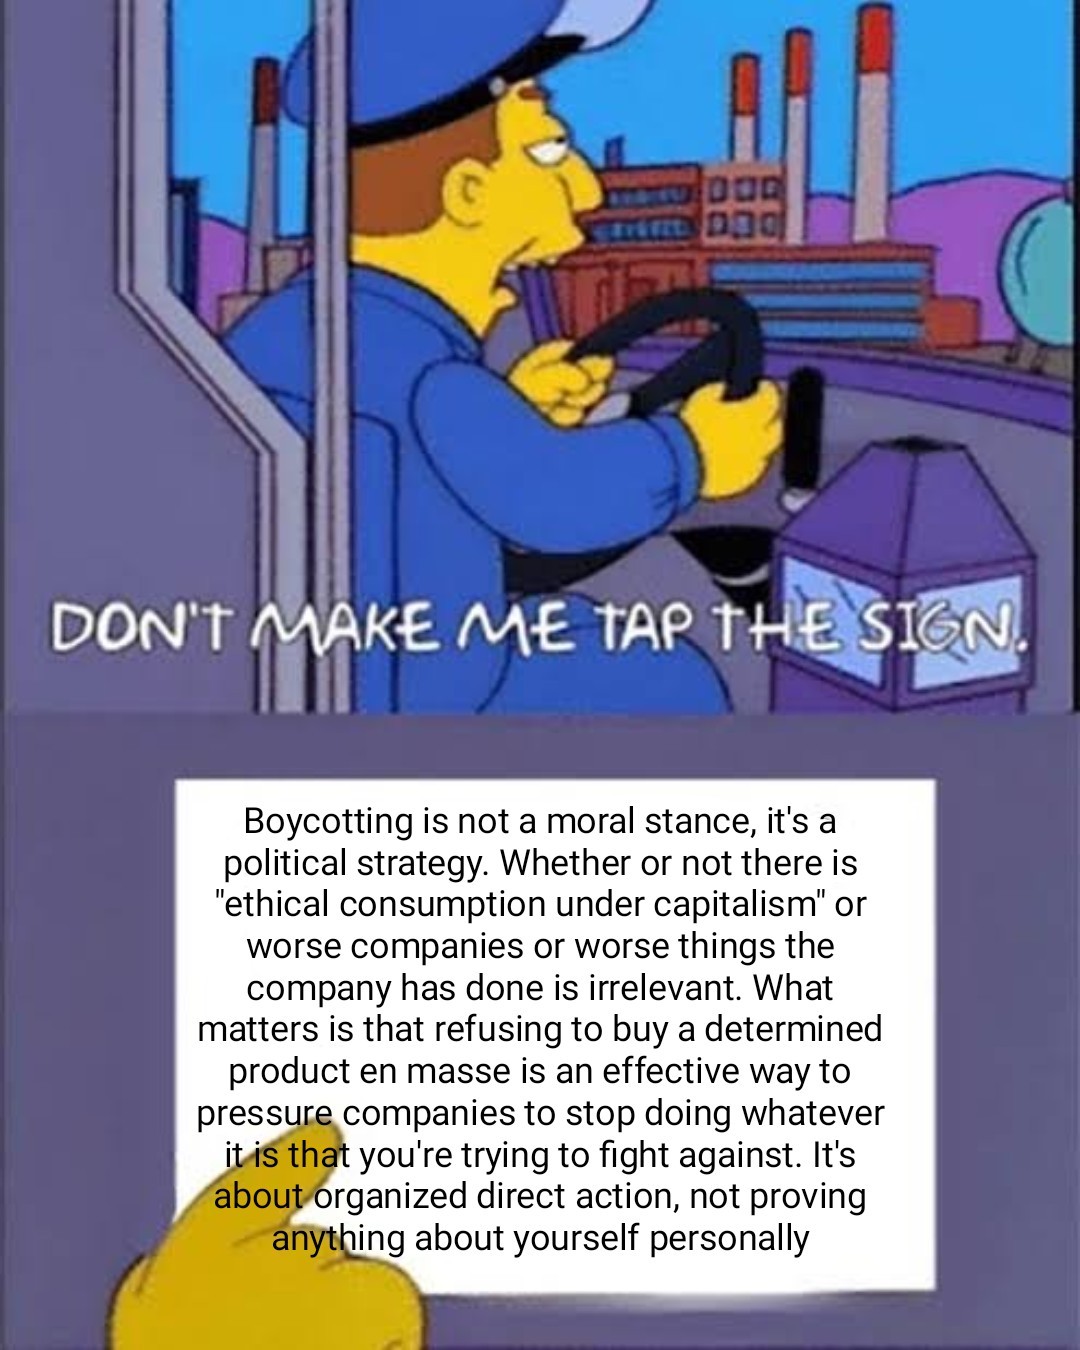 A Simpsons bus driver saying, "don't make me tap the sign". He then taps a sign that says, "Boycotting is not a moral stance, it's a political strategy. Whether or not there is "ethical consumption under capitalism" or worse companies or worse things the company has done is irrelevant. What matters is that refusing to buy a determined product en masse is an effective way to pressure companies to stop doing whatever it is that you're trying to fight against. It's about organized direct action, not proving anything about yourself personally"